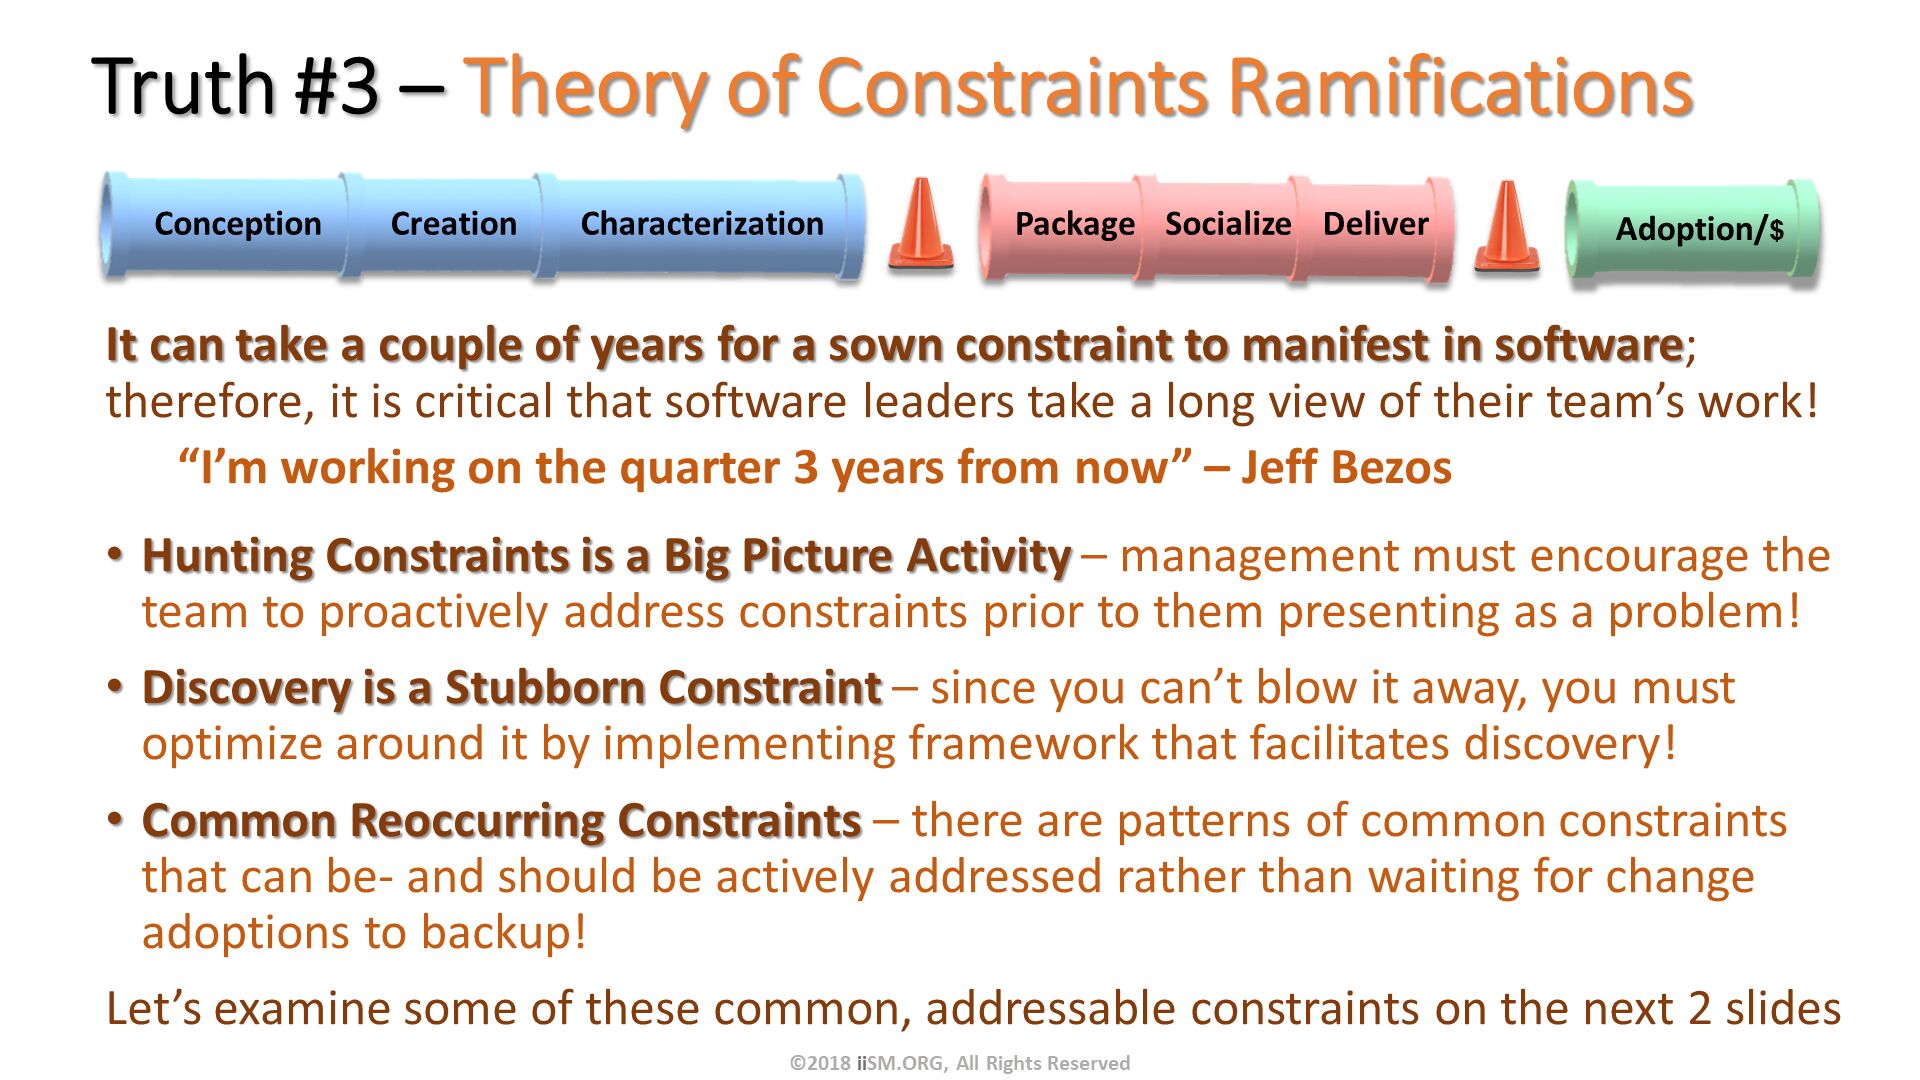 theory of constraints